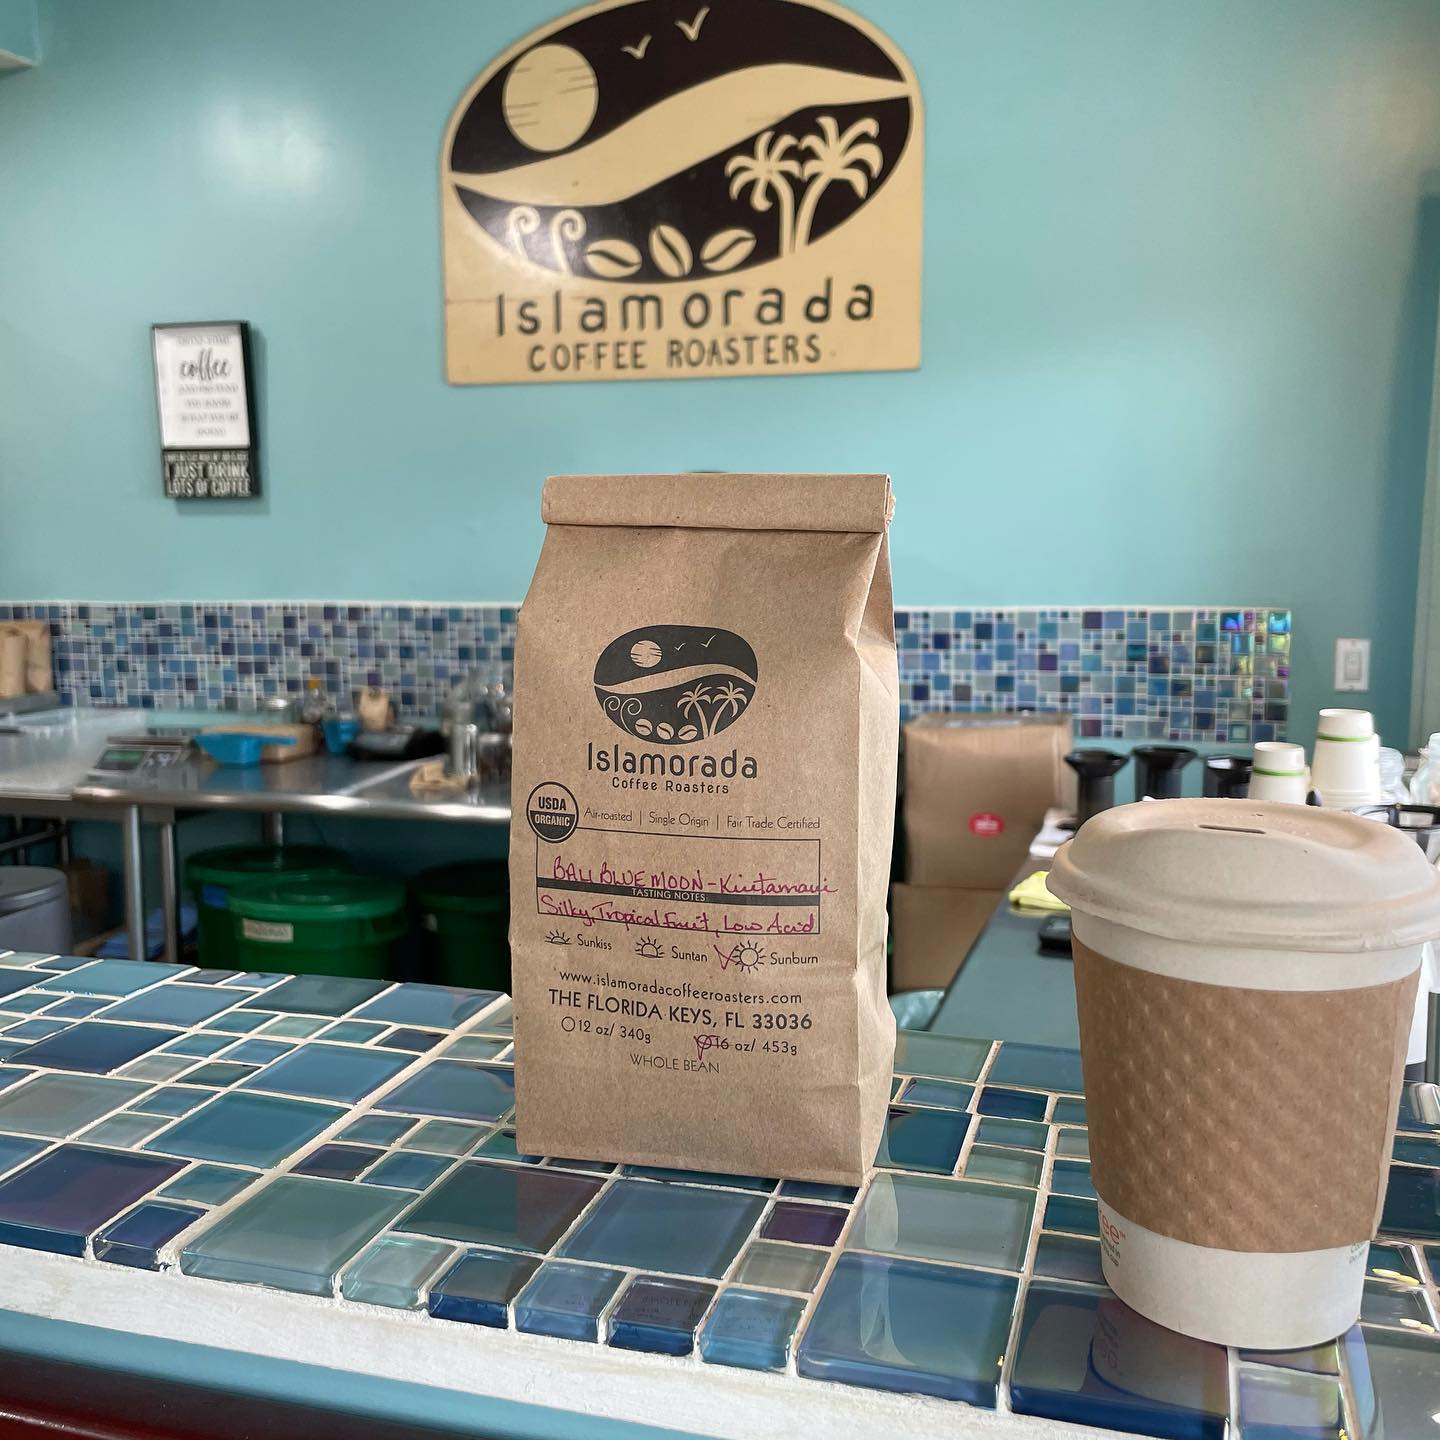 Islamorada Coffee Roasters features 100 percent Arabica organic coffee drinks brewed to patrons’ specifications. Image: Stay Adventurous